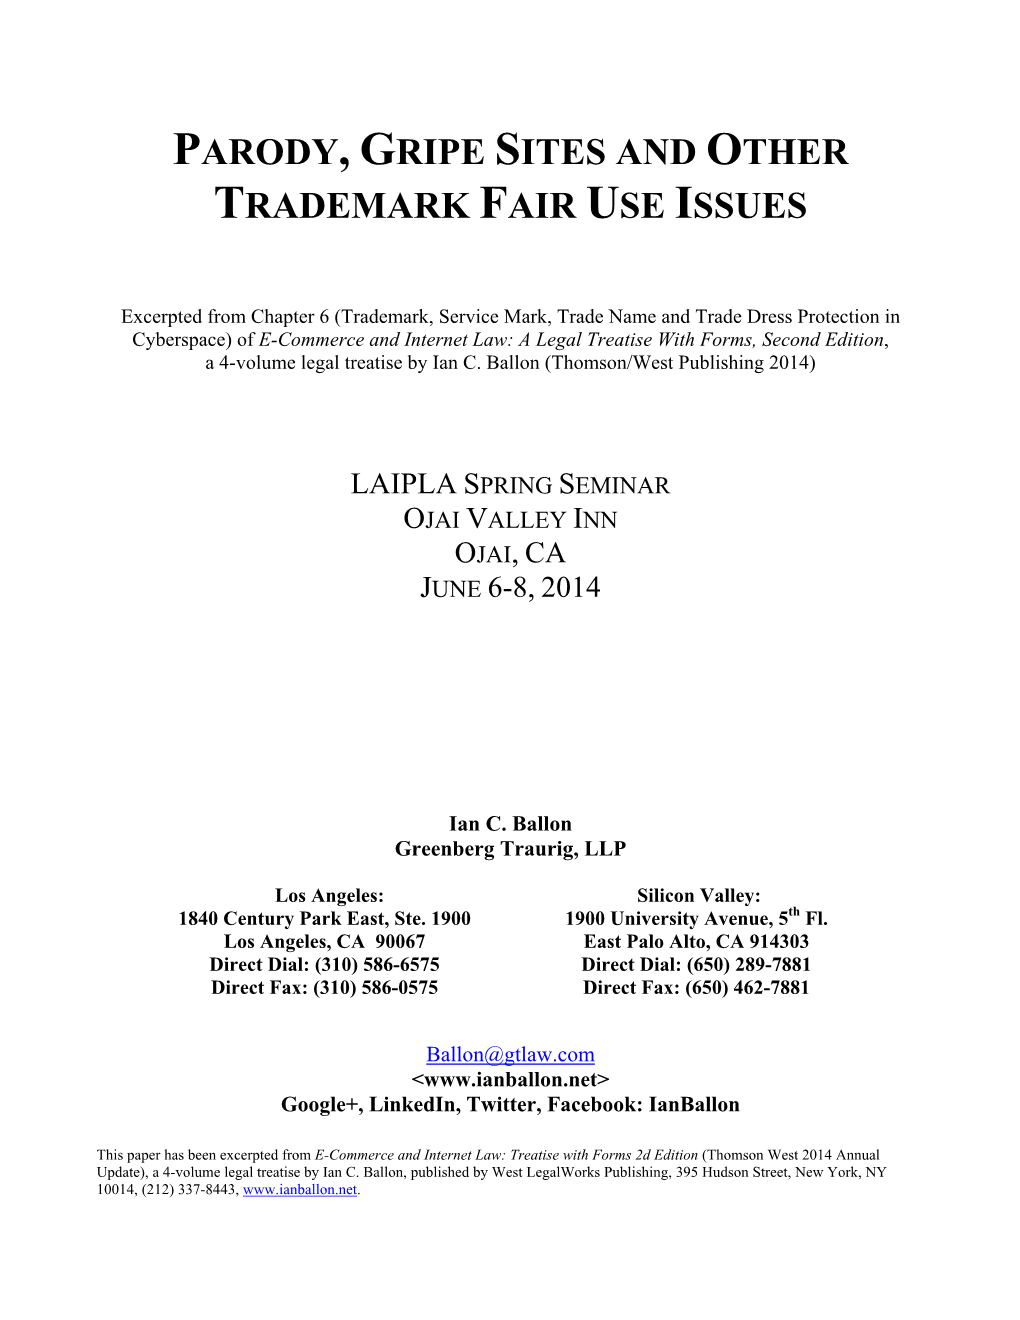 Parody, Gripe Sites and Other Trademark Fair Use Issues